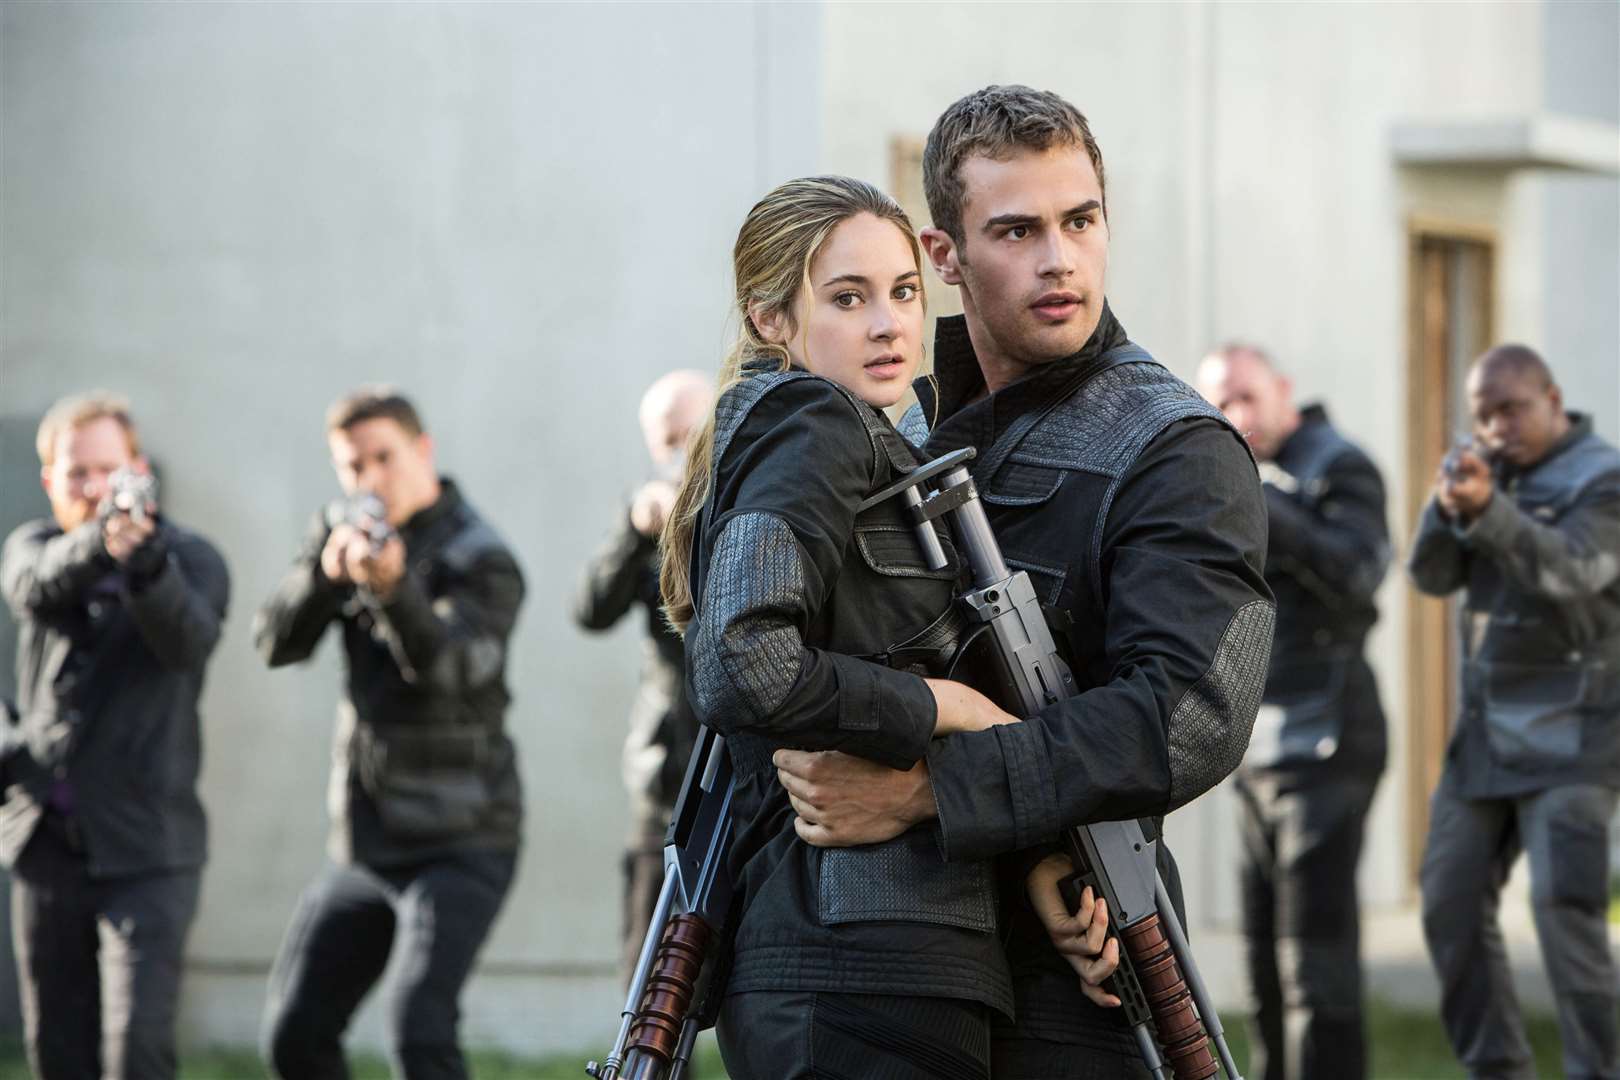 Divergent, with Shailene Woodley as Tris and Theo James as Four. Picture: PA Photo/Entertainment One